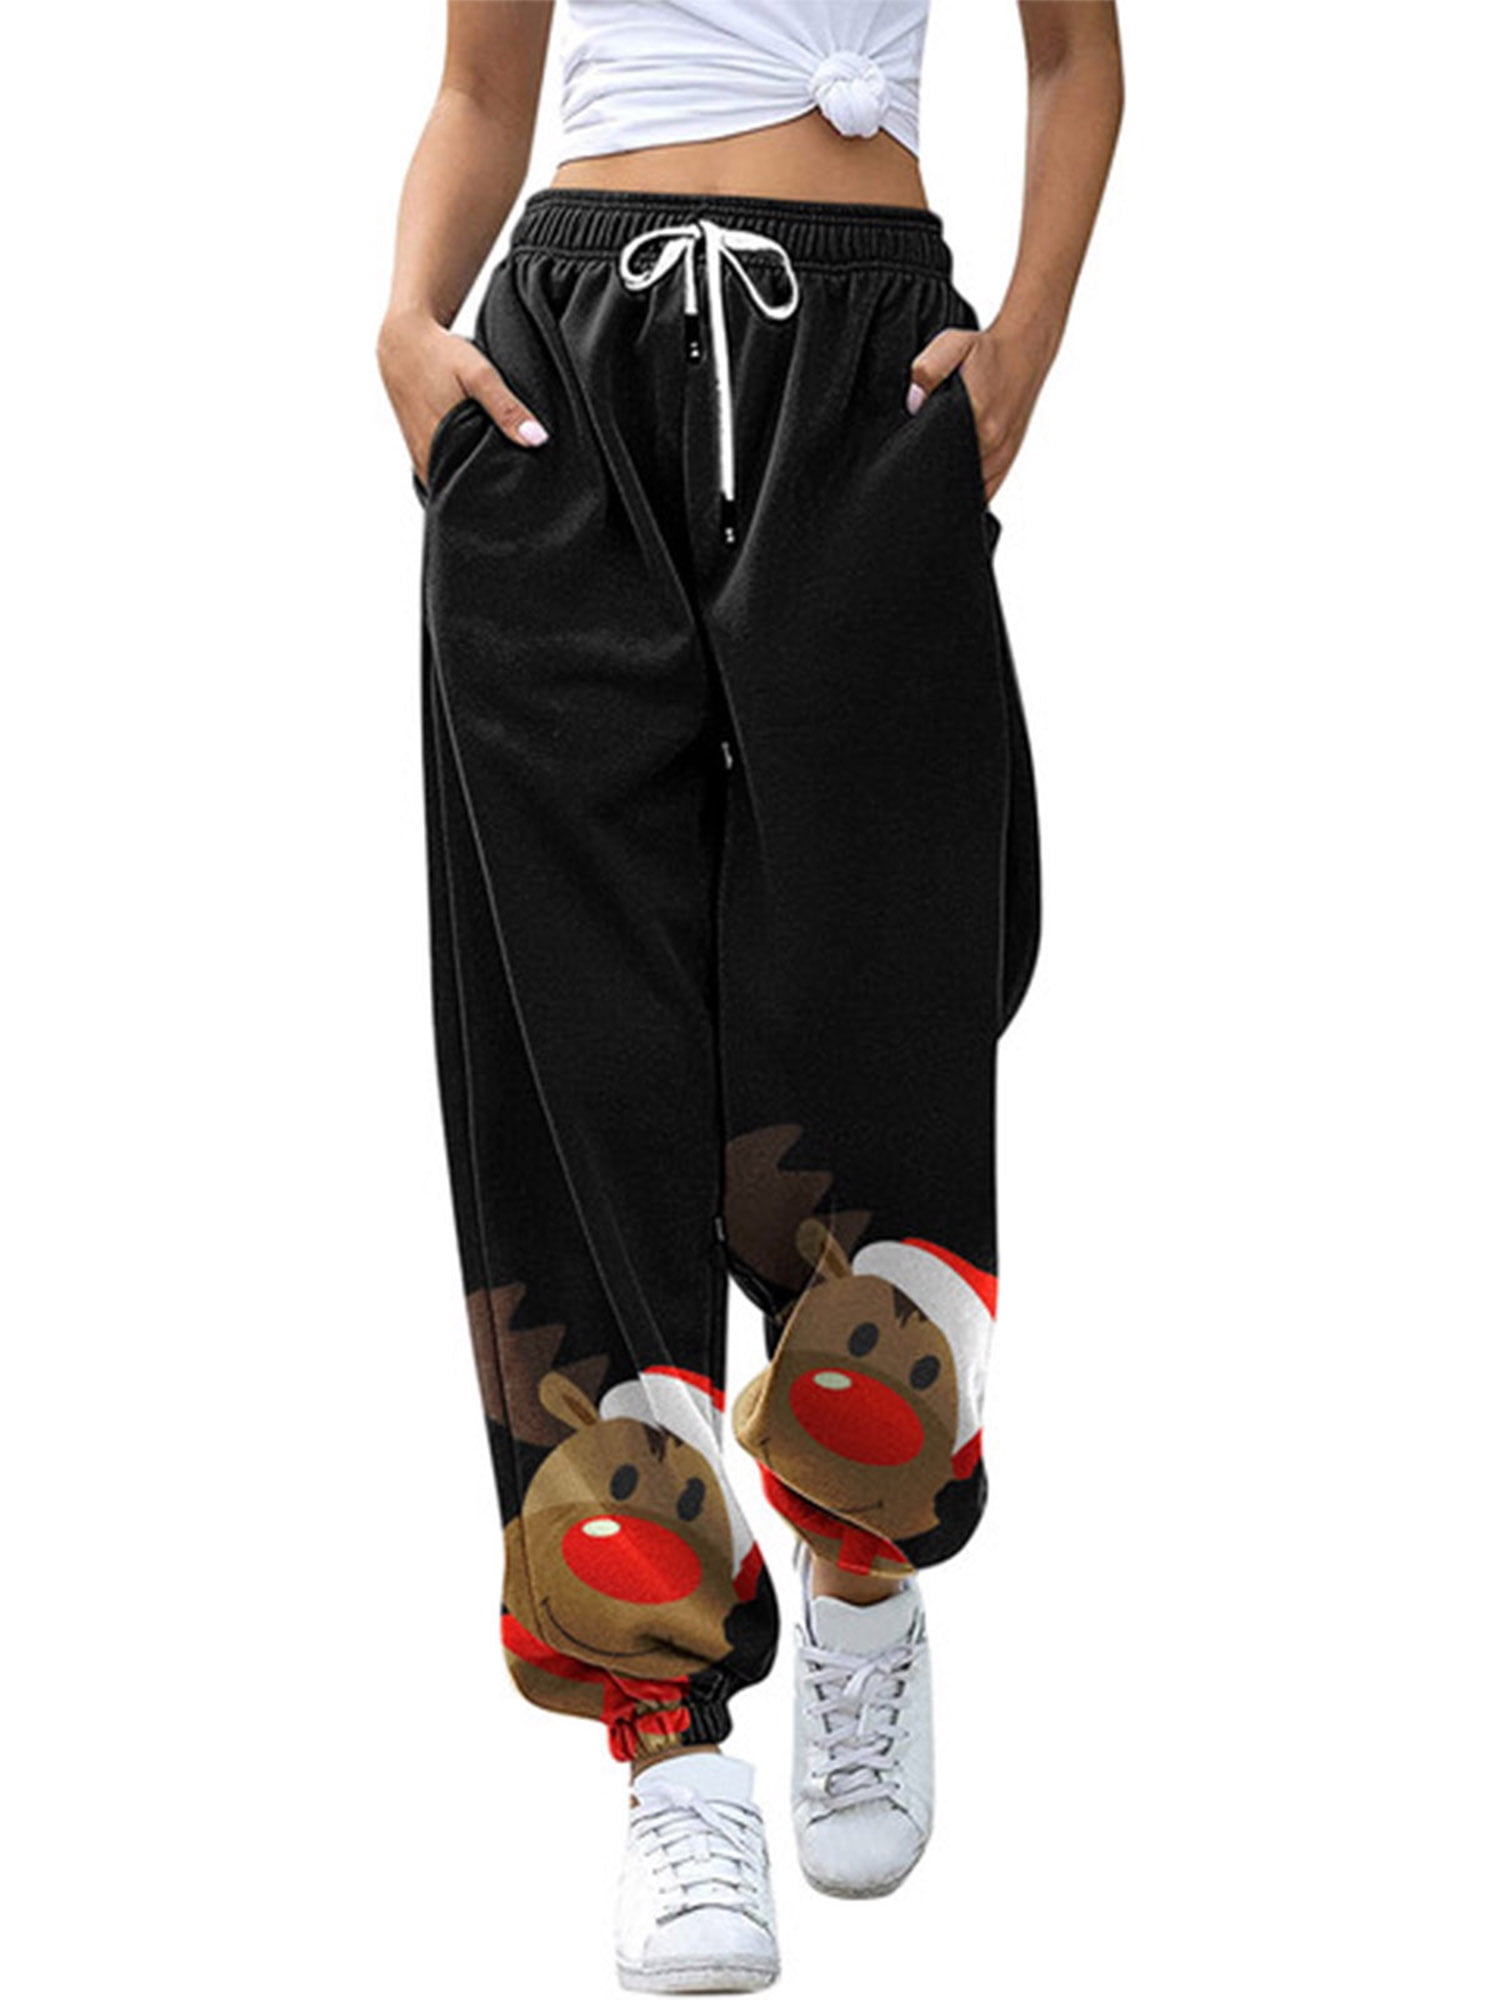 Snowman Lee Mens Big and Tall Fleece Lined Sweatpants Casual Travel Fitted Winter Jogger Pants 